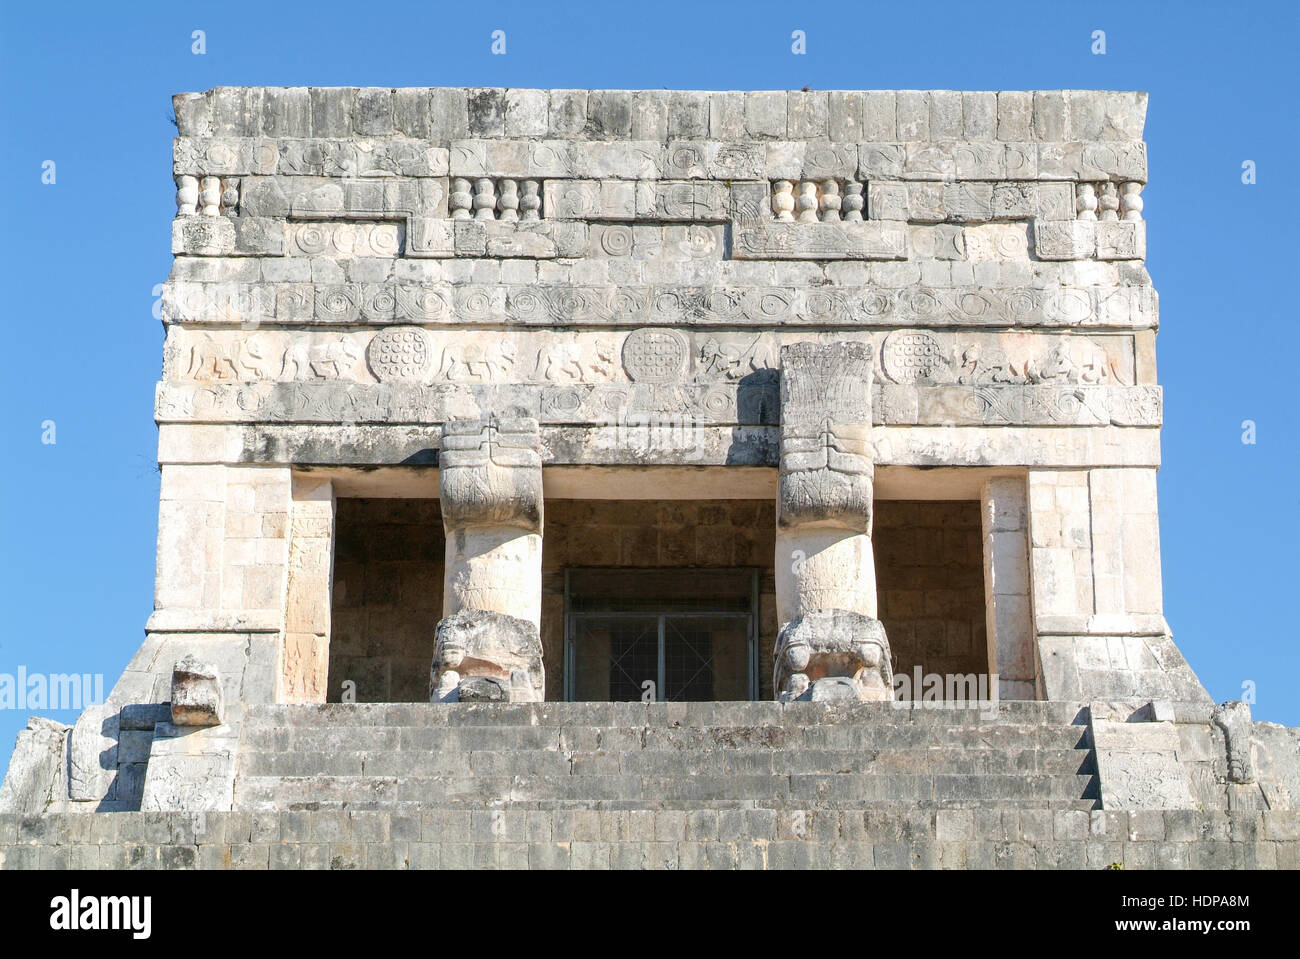 Mayan pyramid of Jaguares in Chichen Itza, Mexico Stock Photo